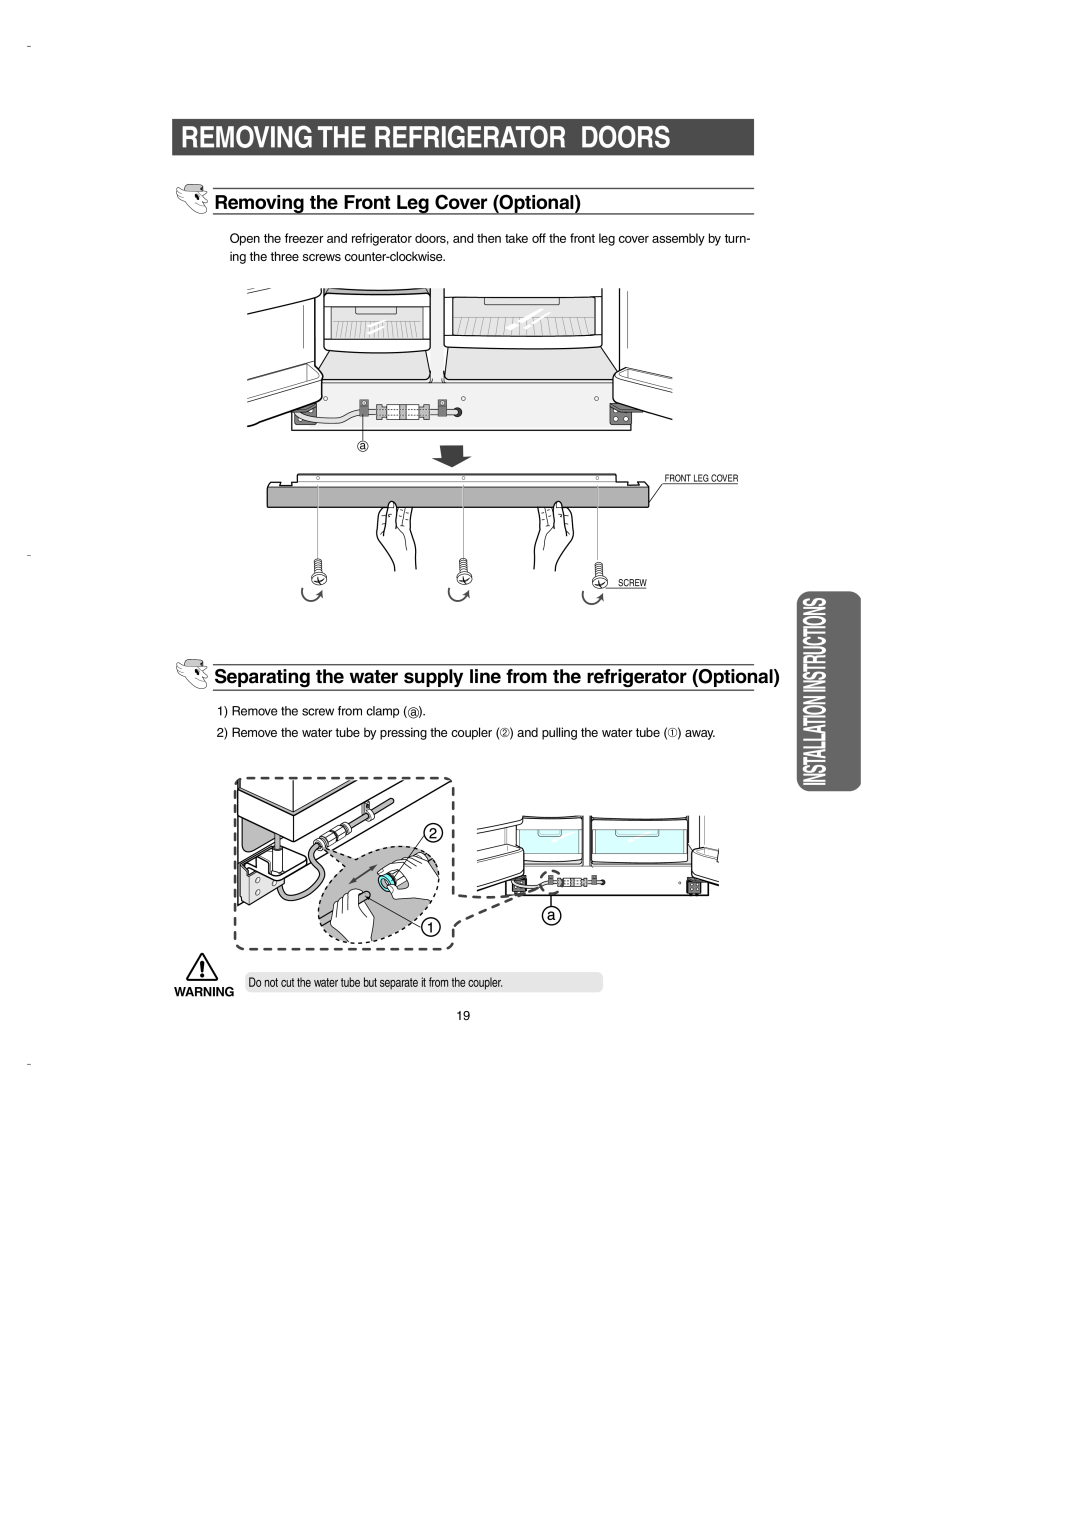 Samsung DA99-00275B Removing The Refrigerator Doors, Removing the Front Leg Cover Optional, Installation Instructions 